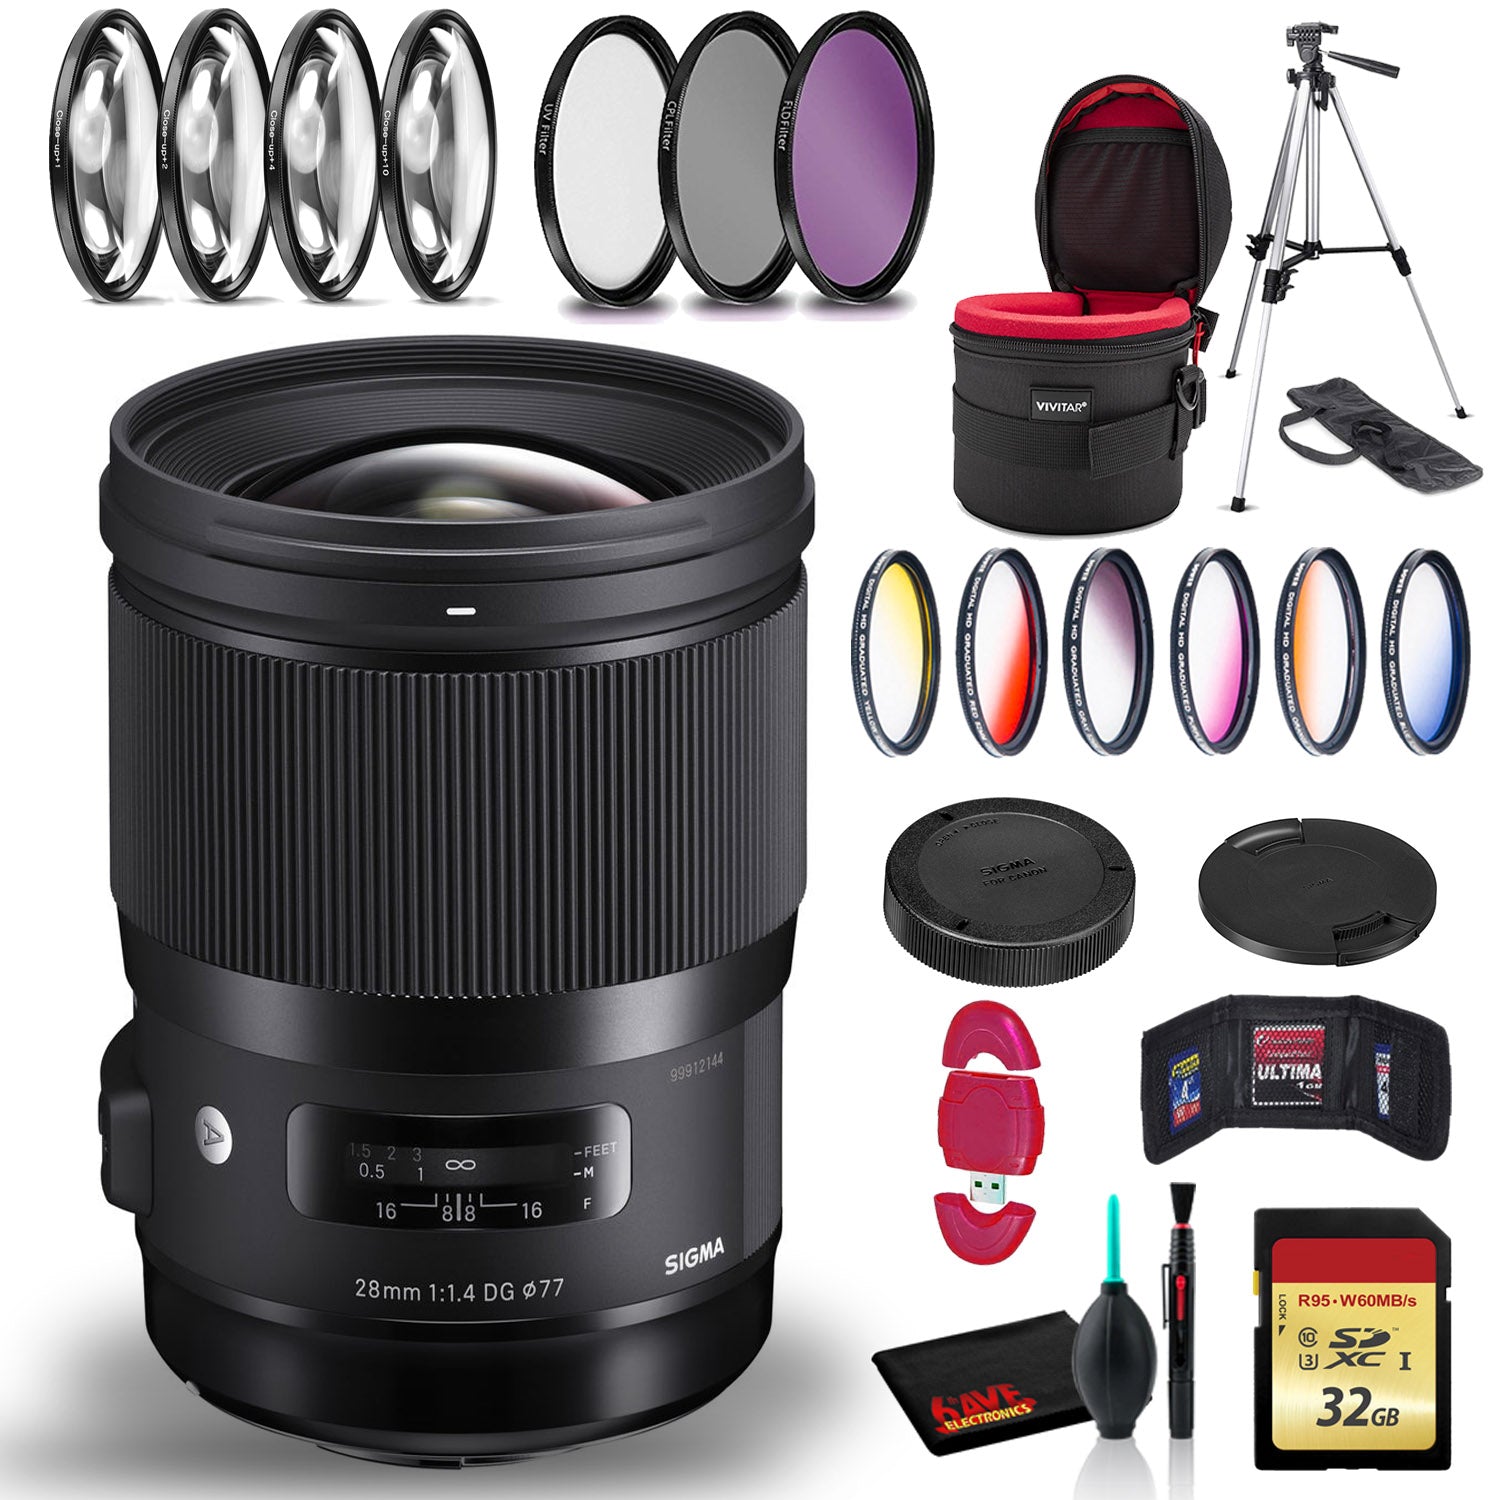 Sigma 28mm f/1.4 DG HSM Art Lens for Canon EF with Cleaning Kit, Full Size Tripod, 32GB Memory Kit, Filter Kit, and Case